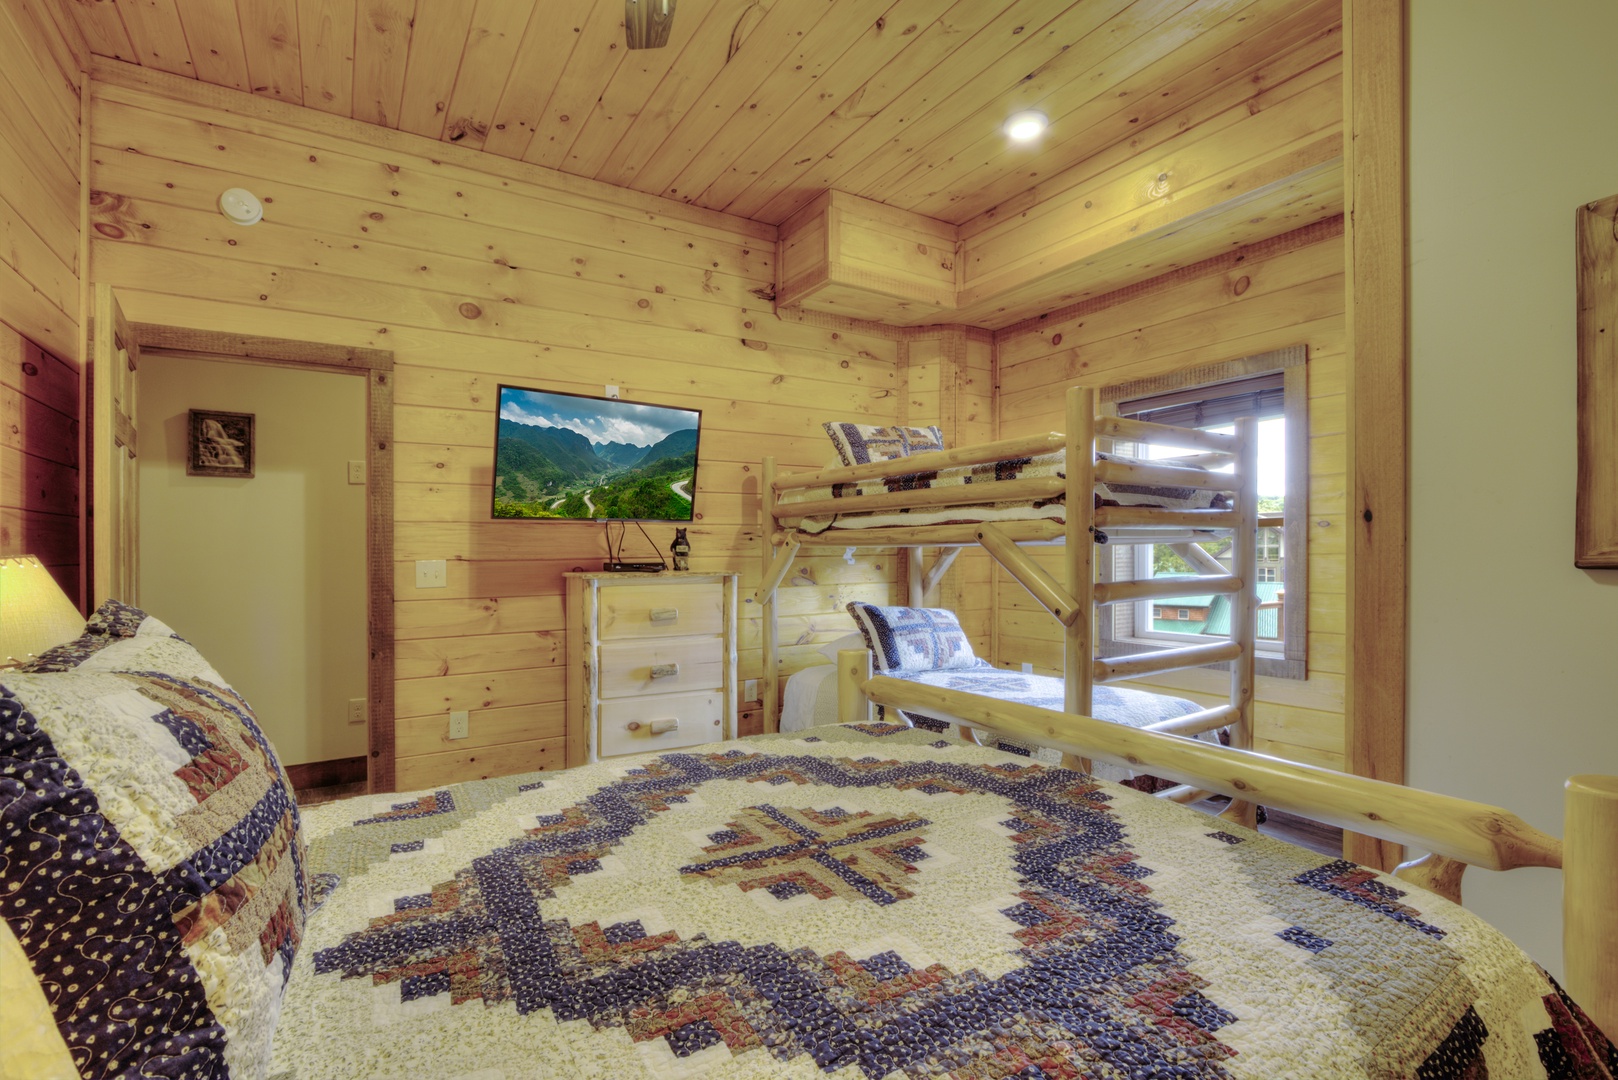 Log Bunk Bed and Flat Screen at The Best View Lodge, a 5 bedroom cabin rental located in gatlinburg